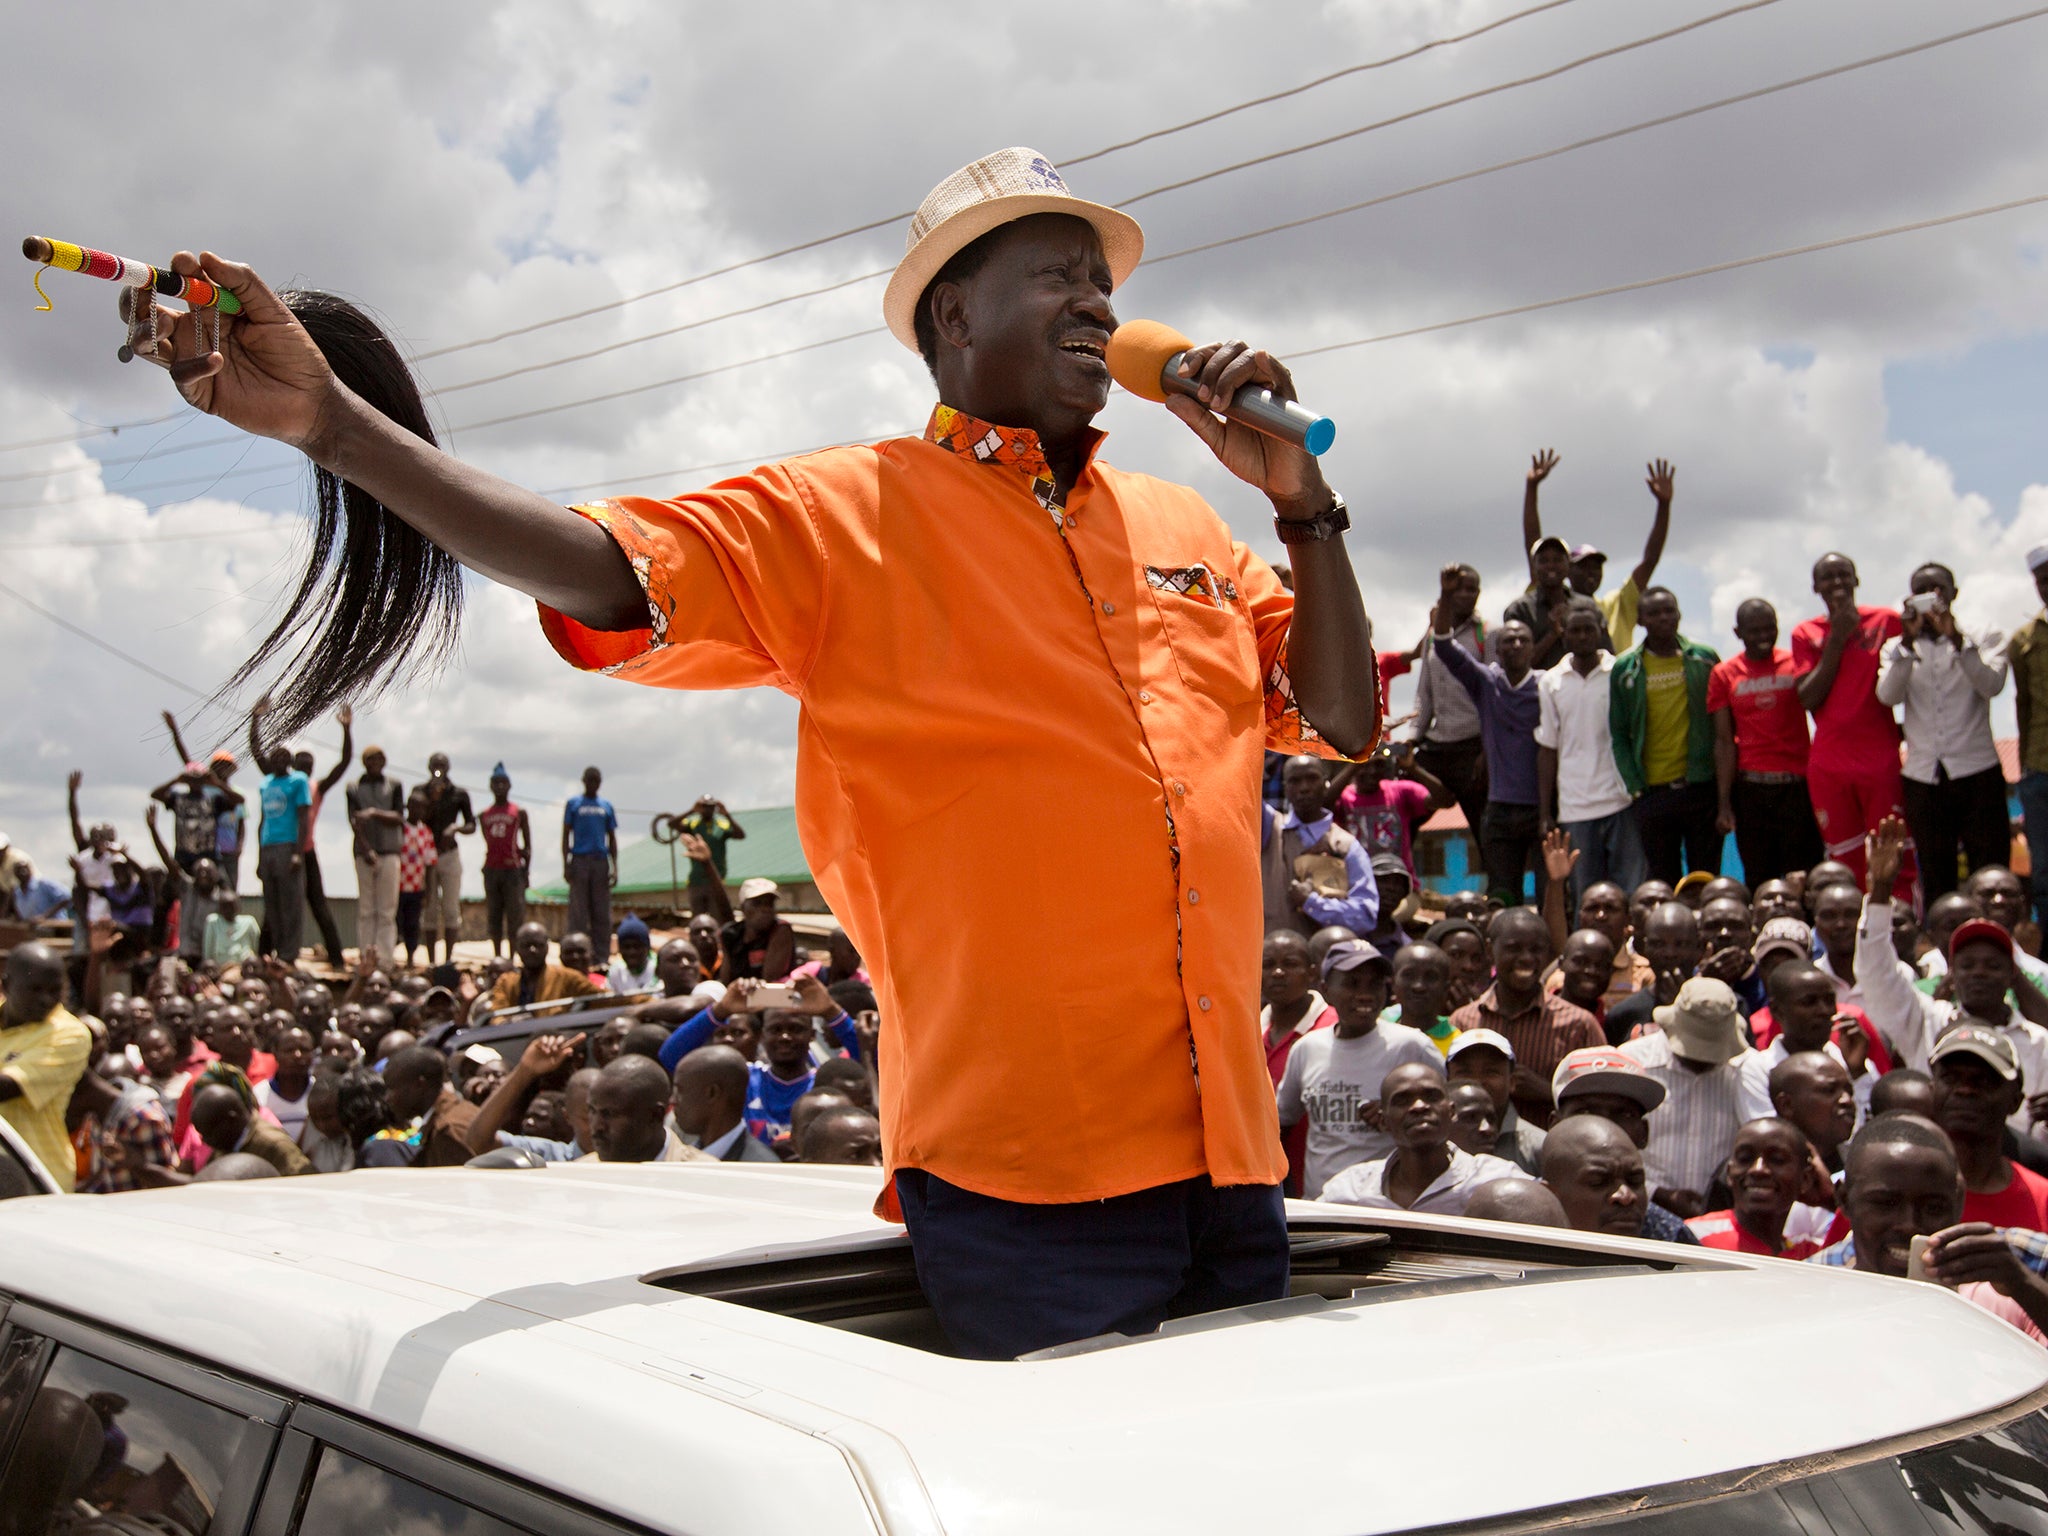 Opposition leader Raila Odinga greets his supporters after attending a church service in the slum of Kawangware in Nairobi, Kenya